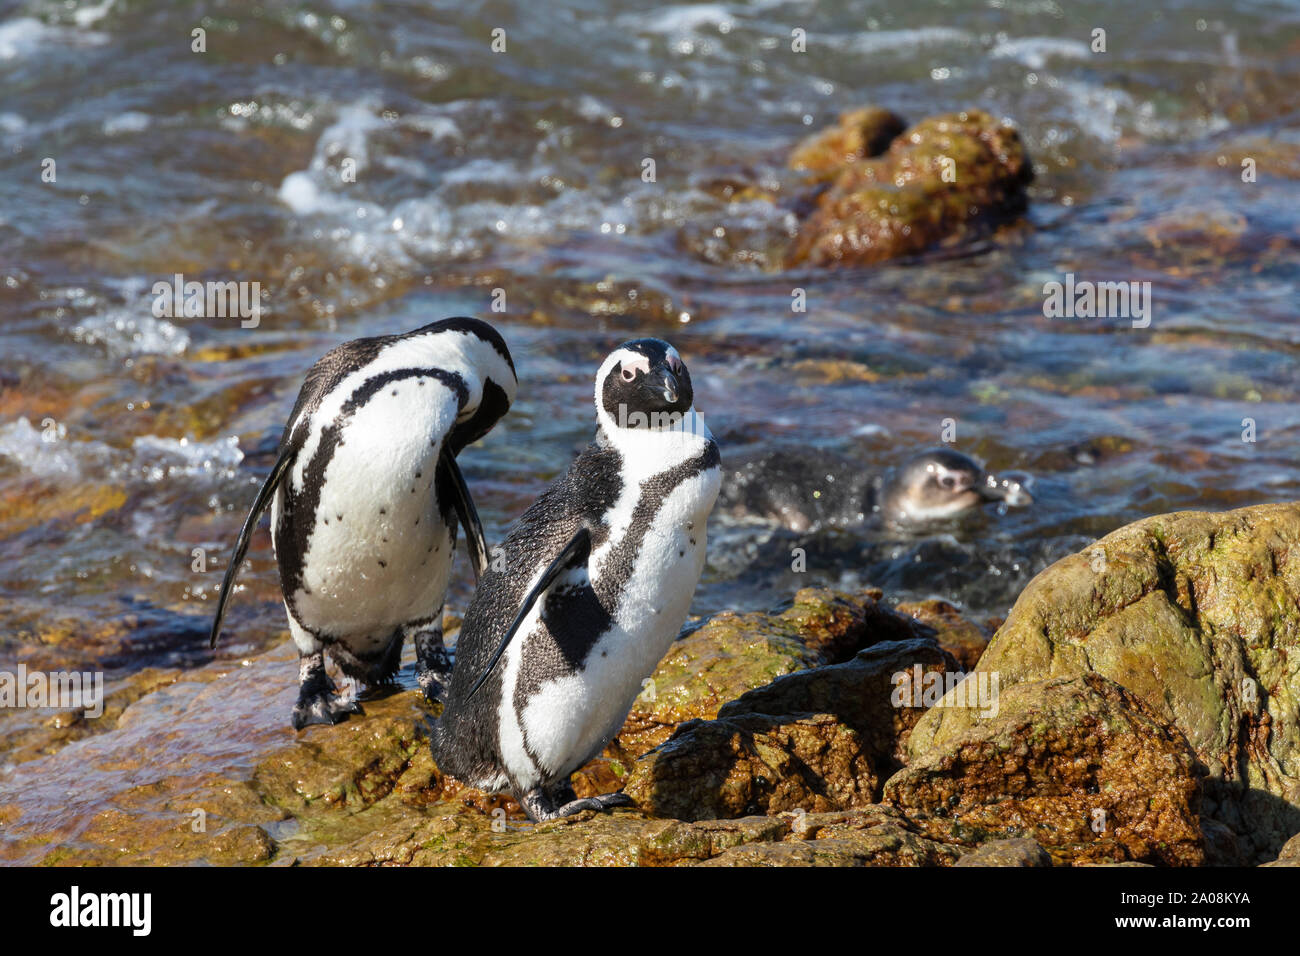 African Penguins (Spheniscus demersus) Stony Point Nature Reserve, Betty's Bay, Western Cape, South Africa, Vulnerable Species. Jackass Penguin Stock Photo